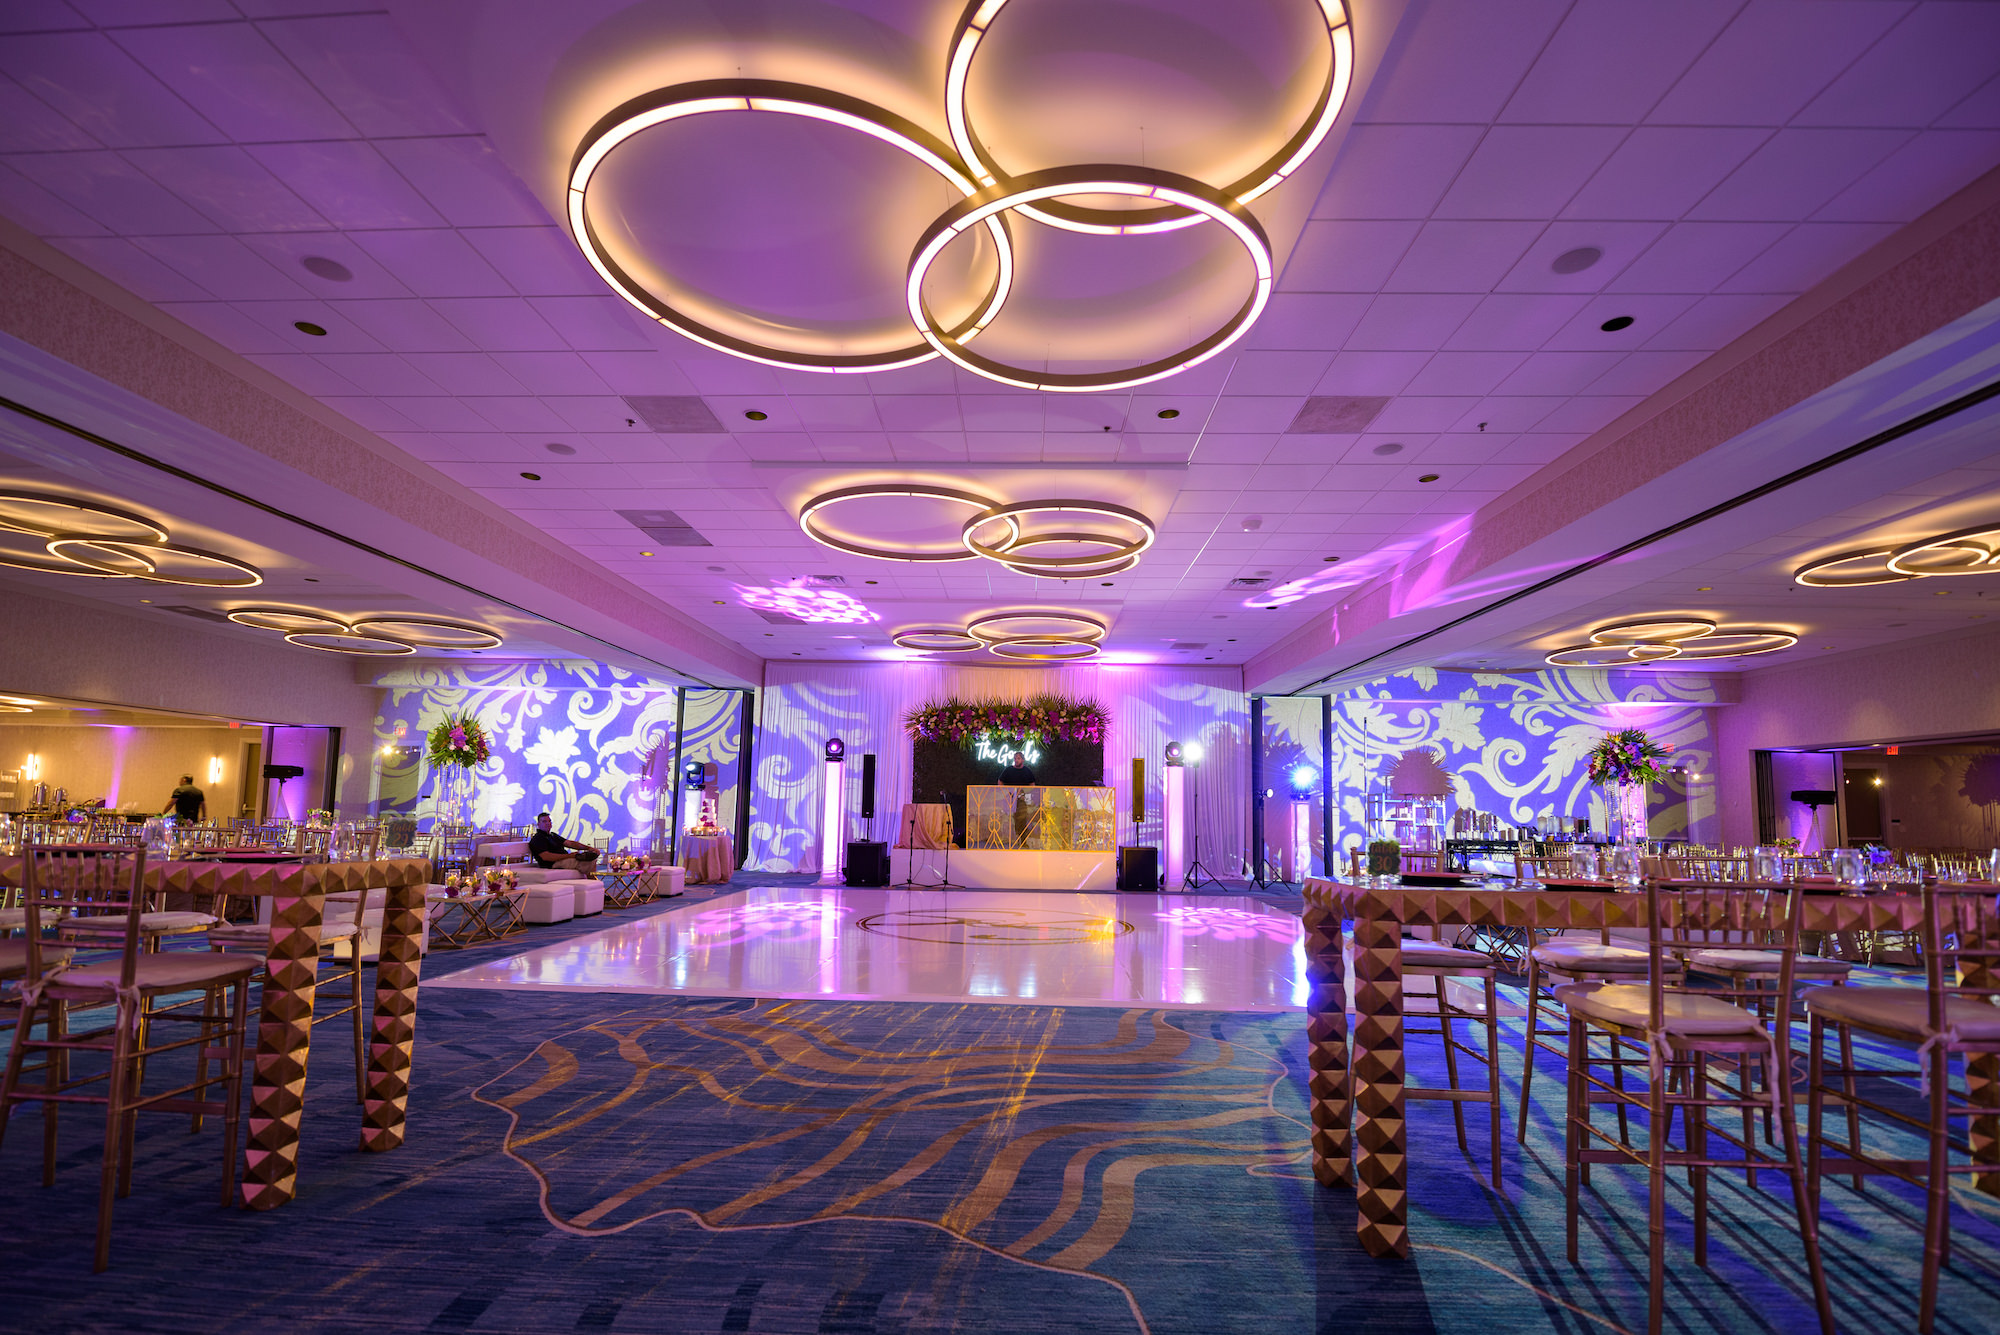 Modern Ballroom Indian Wedding Reception and Tall Centerpieces with White Monogrammed Dance Floor, Hedgewall Backdrop, Neon Sign, and Purple Uplighting | Tampa Bay Venue Hilton Clearwater Beach Resort and Spa | Gabro Event Rentals